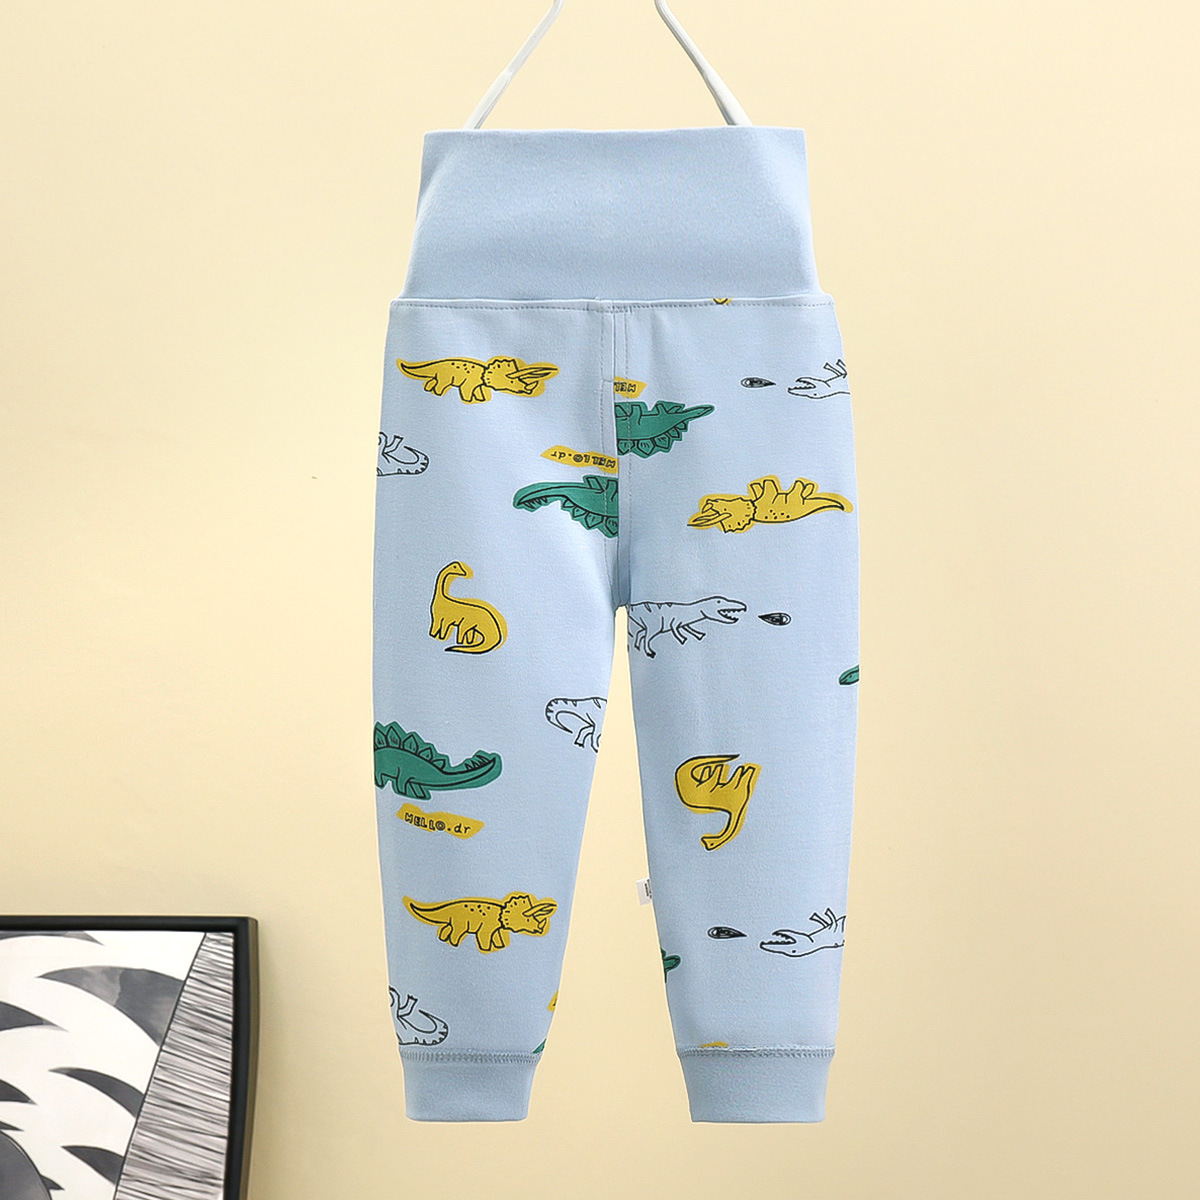 Baby Boys Girls Cotton Pants Cartoon Printing High Waist Belly Protecting Trousers For 1-3 Years Old Kids Tyrannosaurus rex 24-36months 2XL